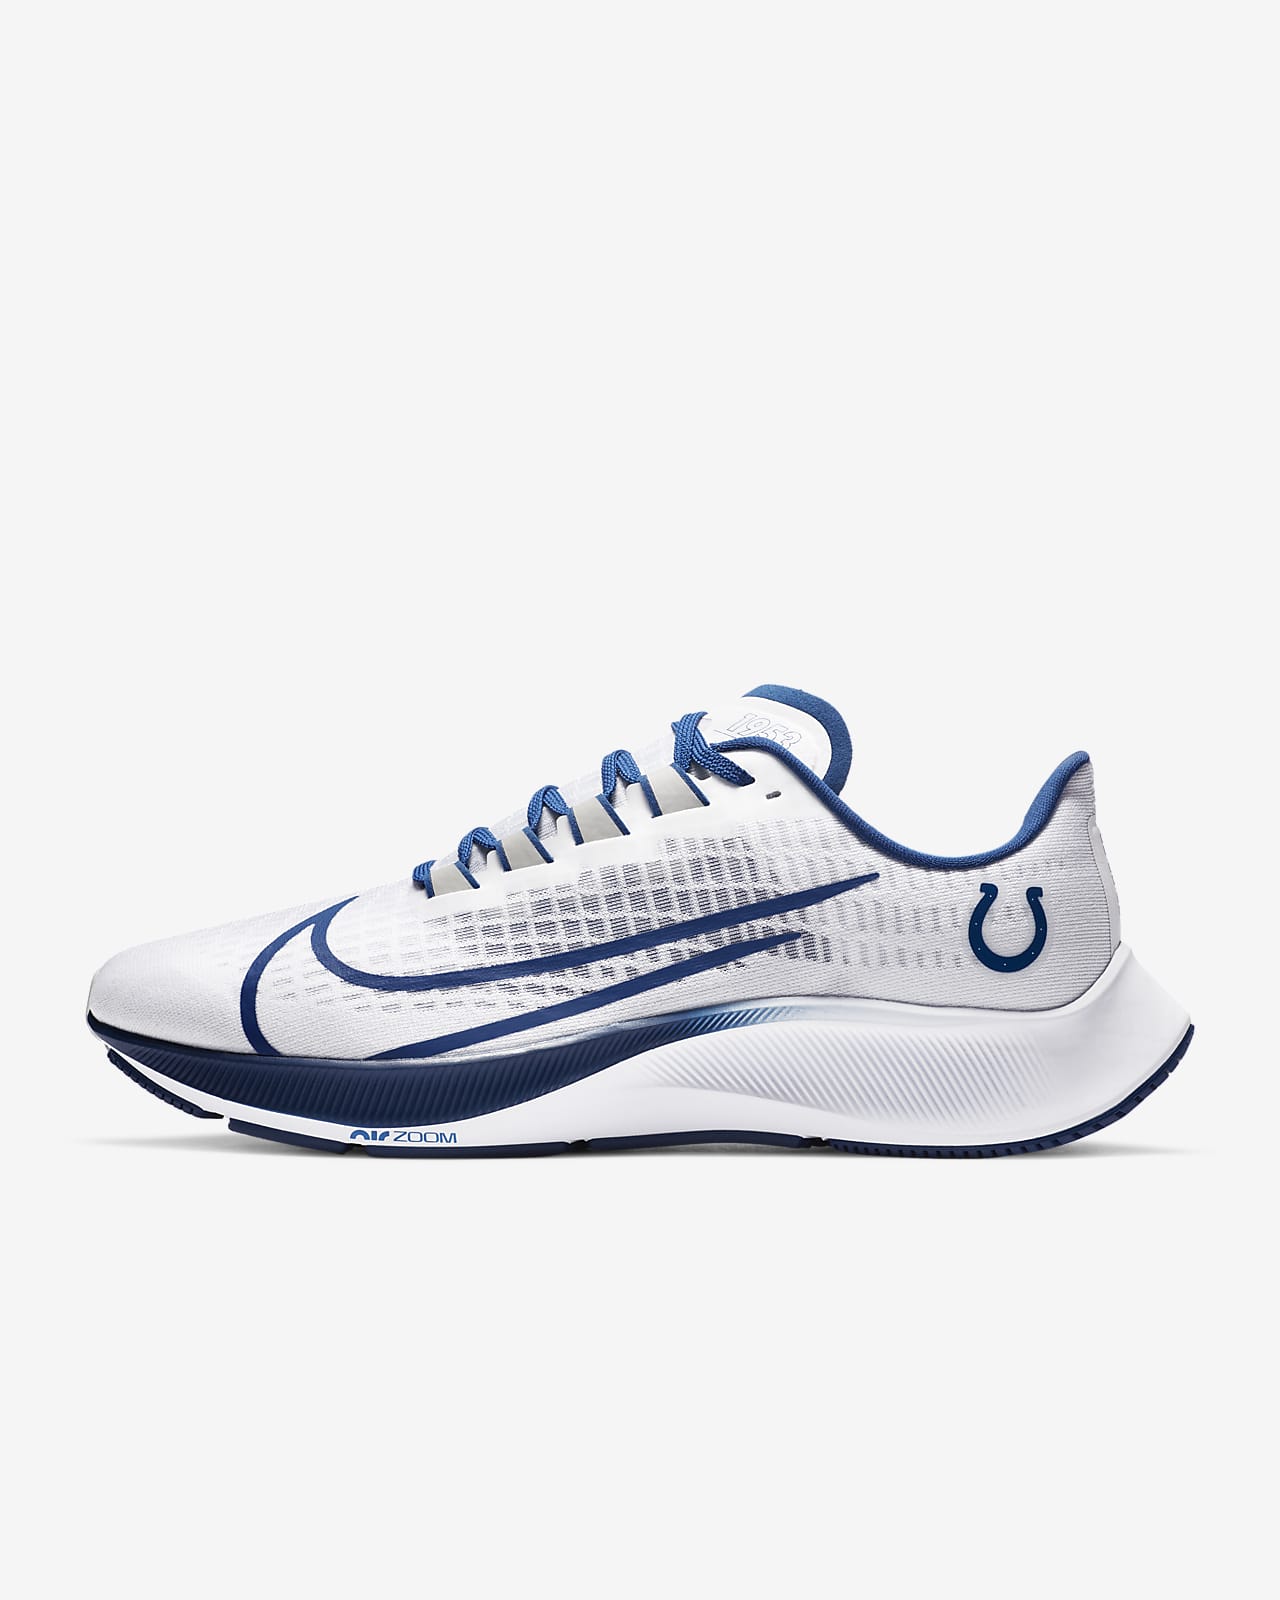 nike colts tennis shoes